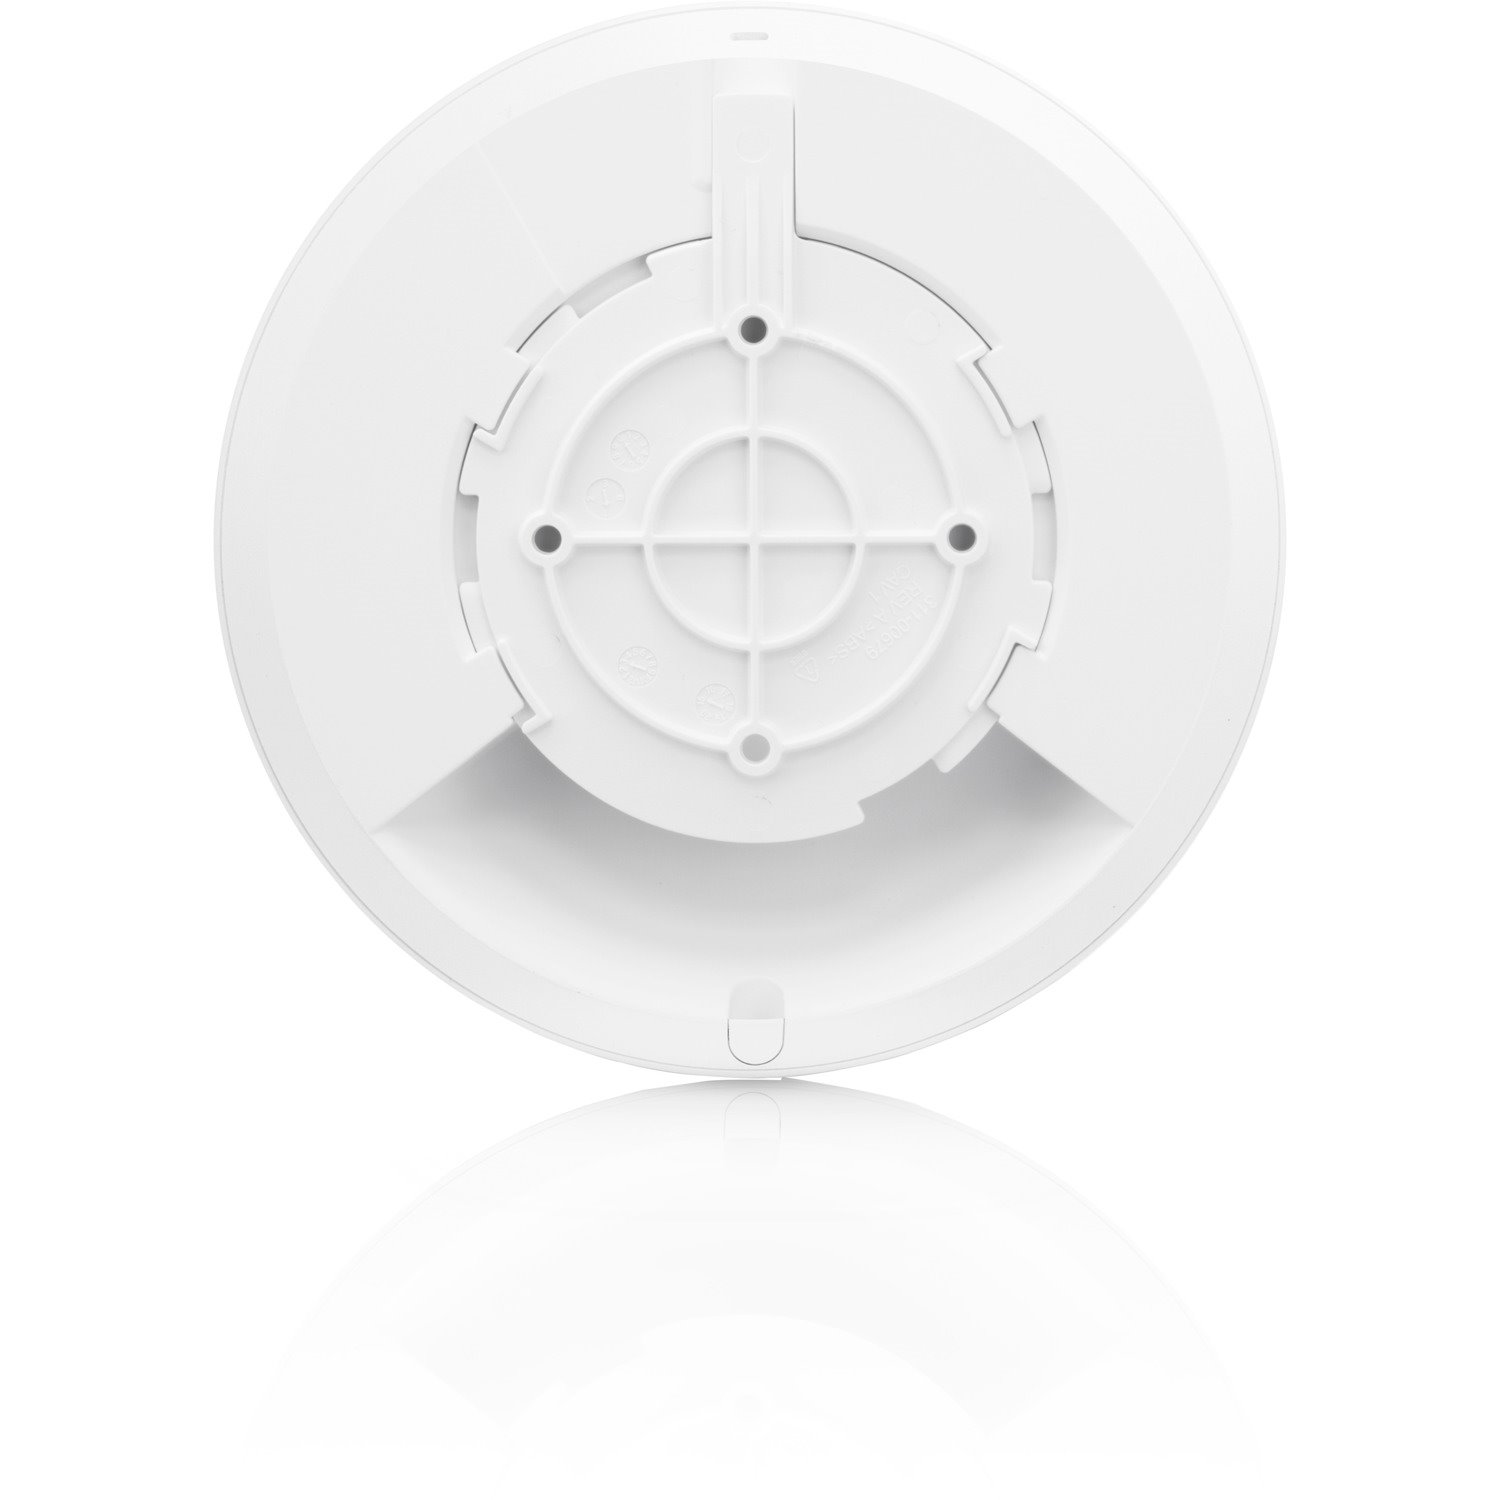 Ubiquiti UniFi Ac Lite 802.11Ac Dual Radio Access Point, 2.4GHz @ 300Mbps, 5GHz @ 867Mbps, 1167Mbps Total, Range Up To 122M